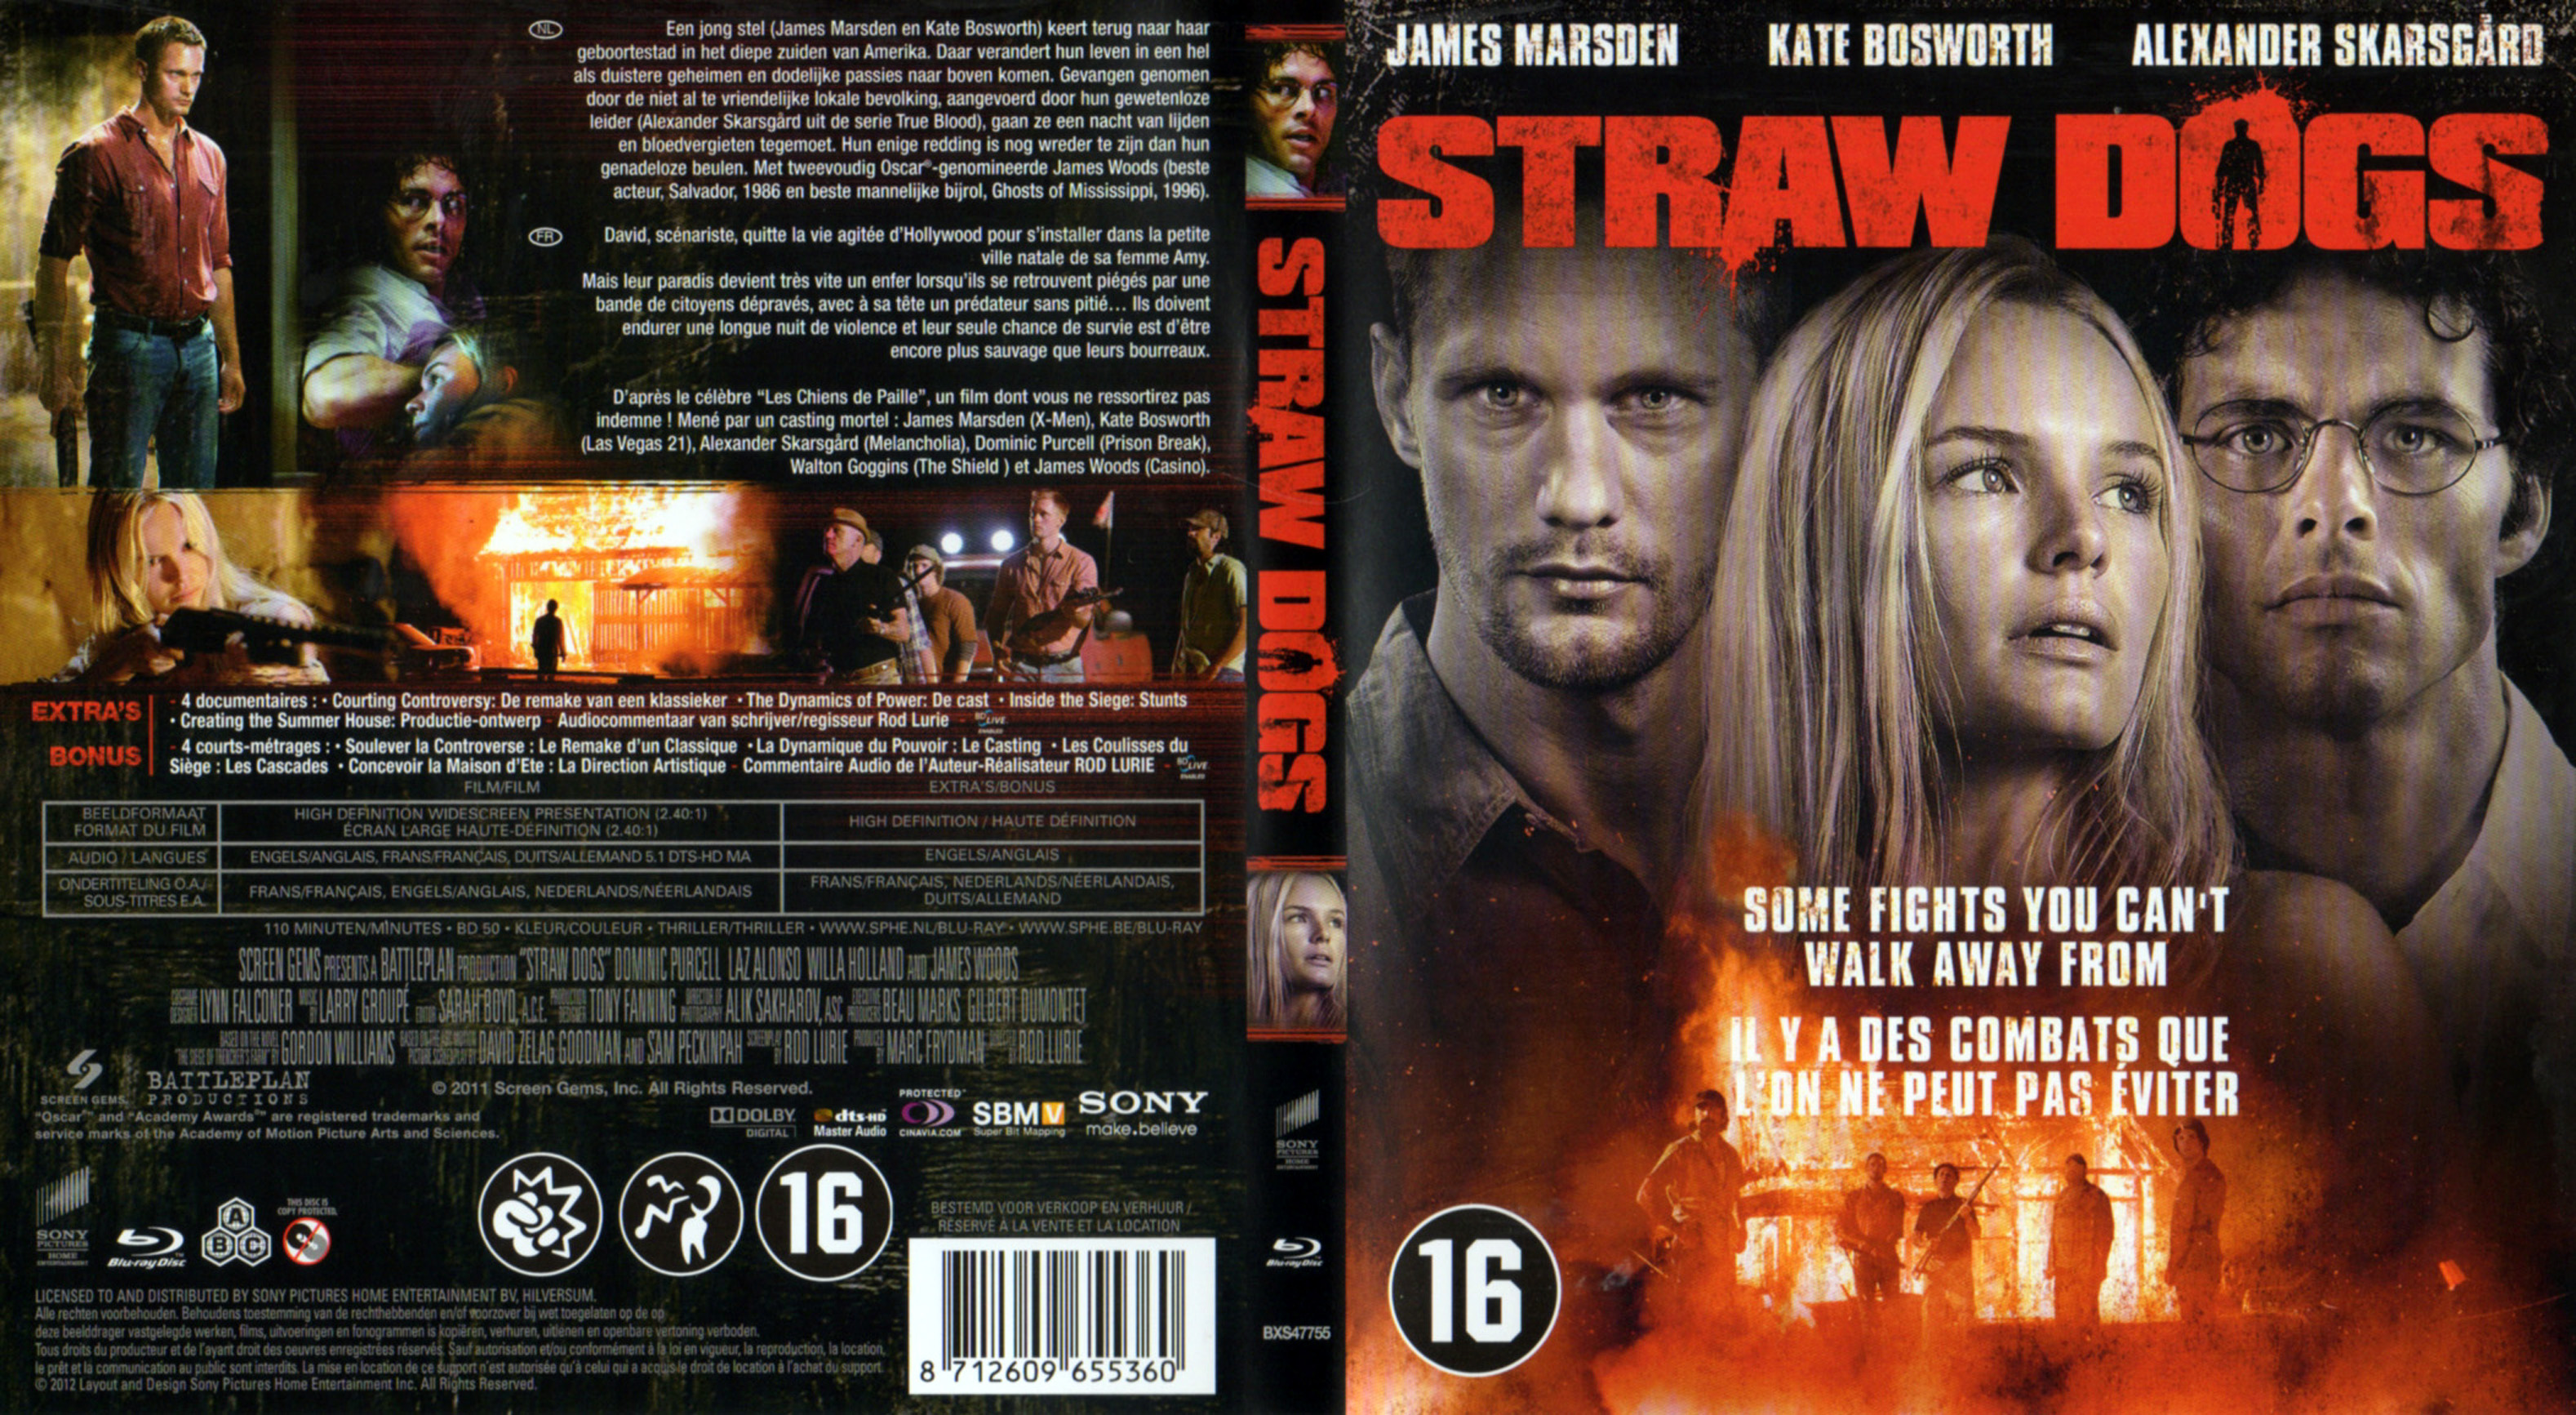 Jaquette DVD Straw Dogs (2011) (BLU-RAY) v2